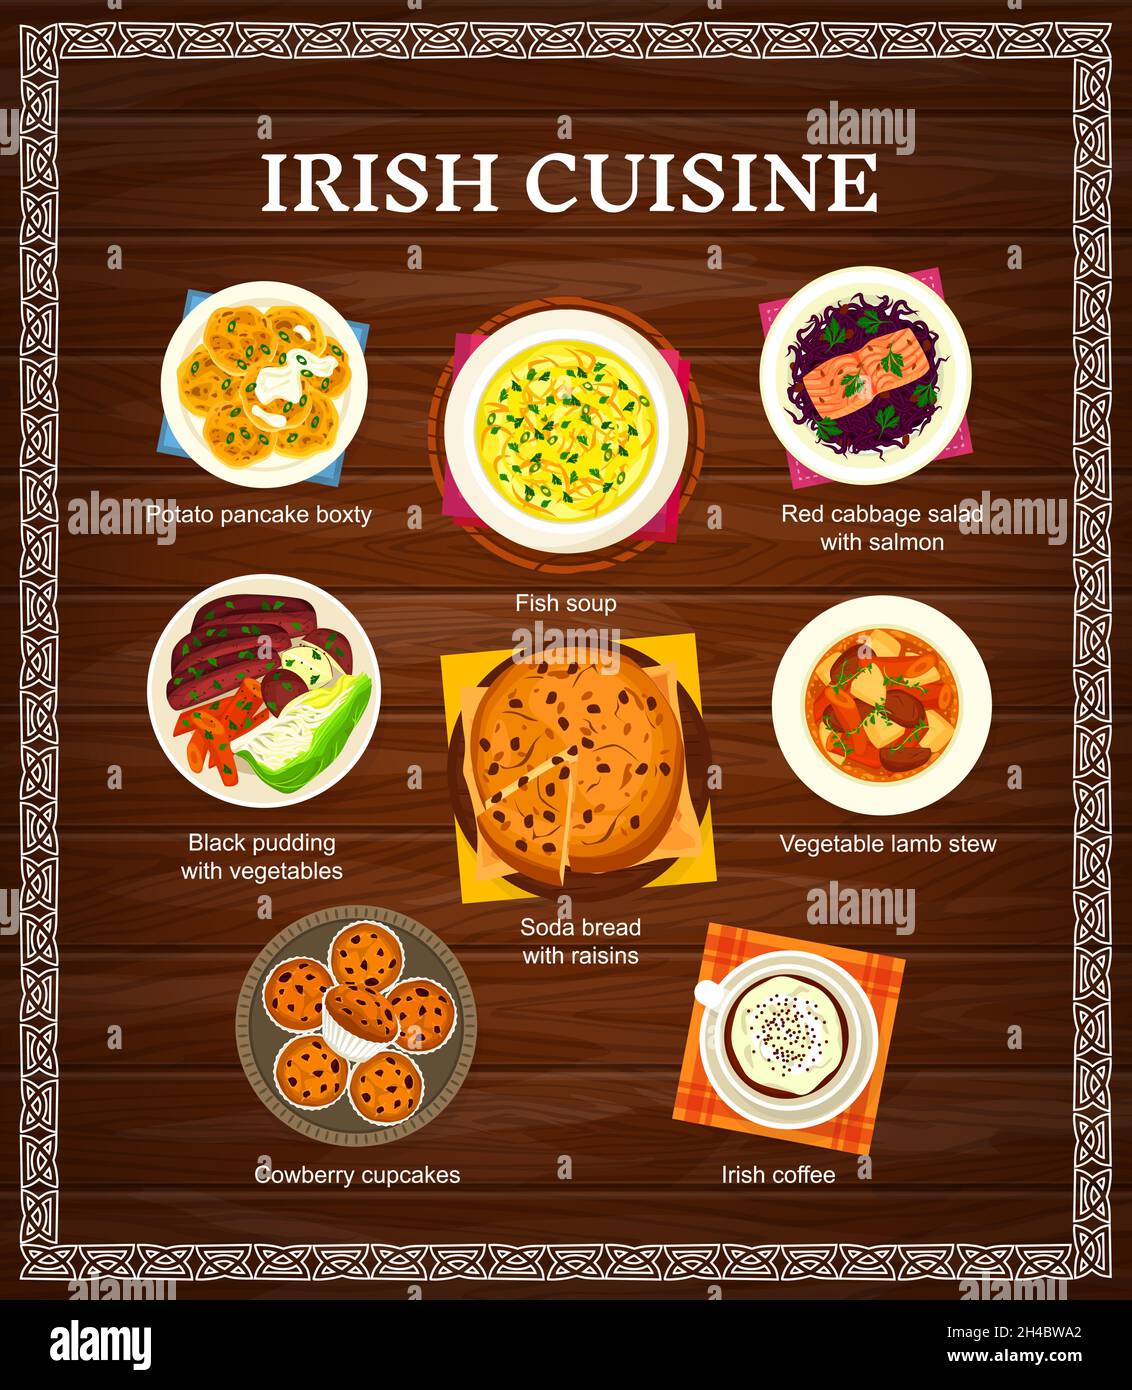 Irish cuisine vector menu potato pancake boxty, fish soup and soda bread with raisins. Cowberry cupcakes, lamb stew and black pudding with vegetables. Stock Vector